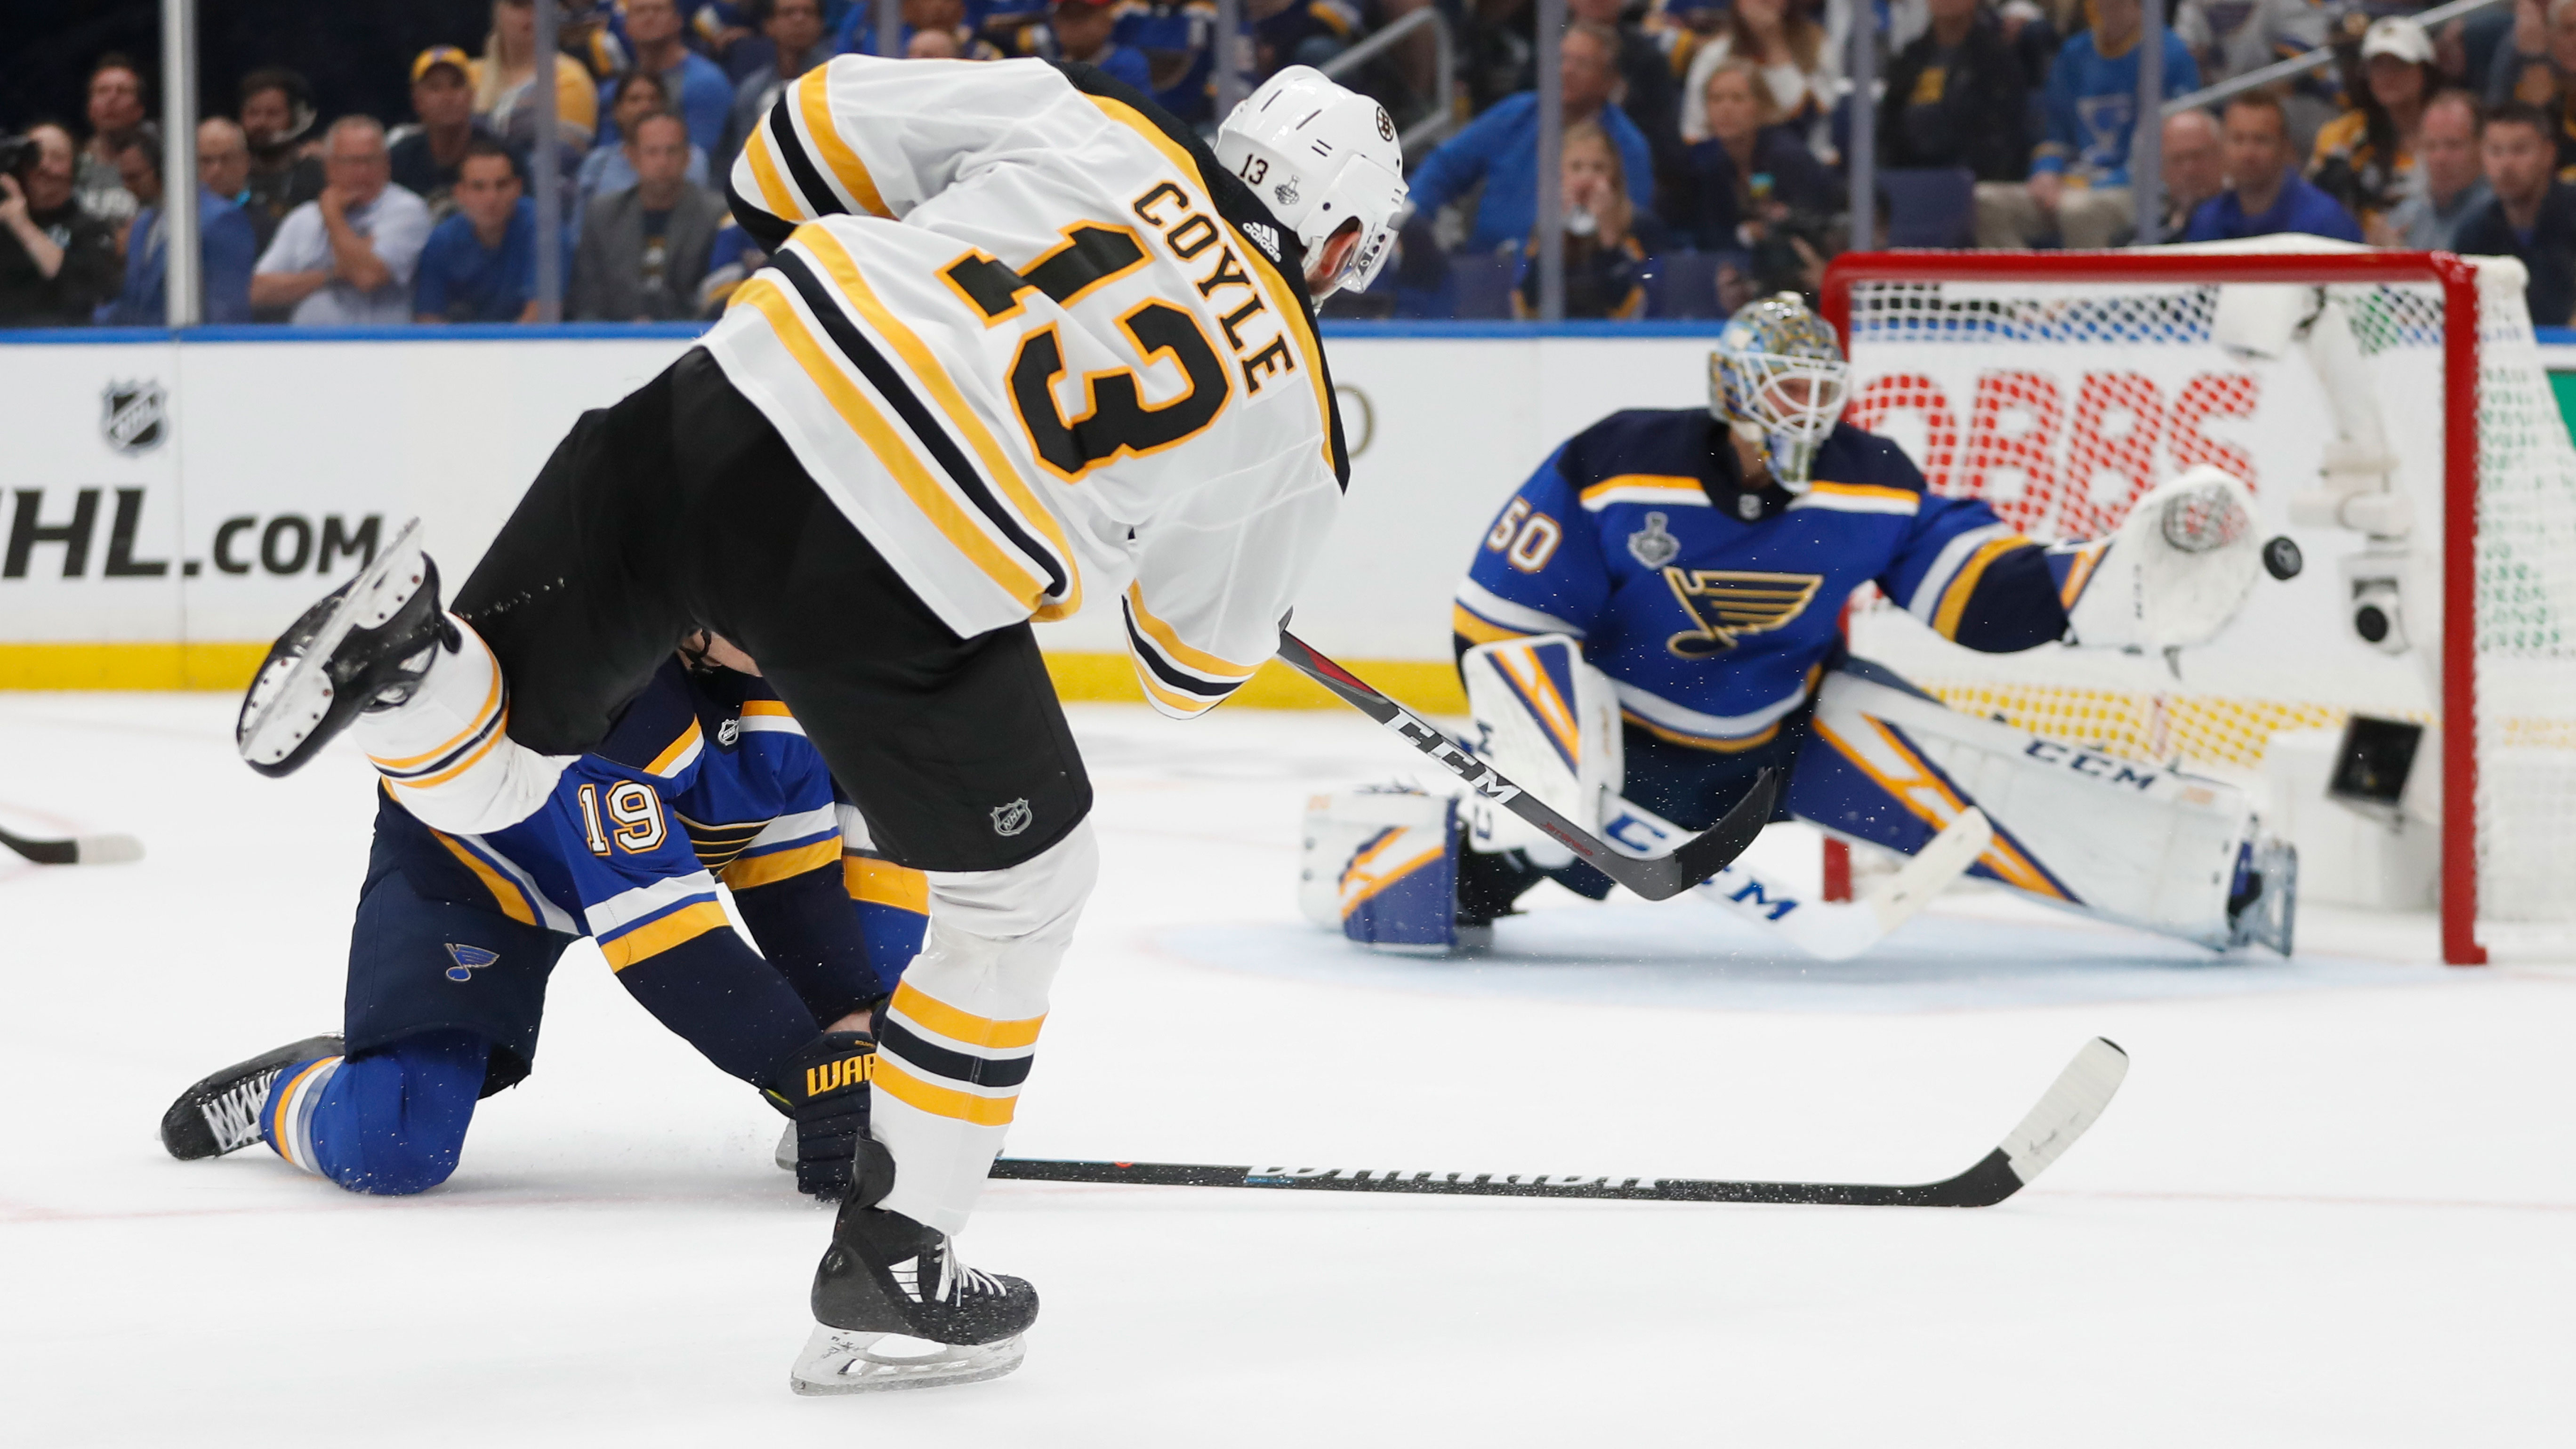 Binnington gets pulled as Blues suffer 7-2 loss to Bruins